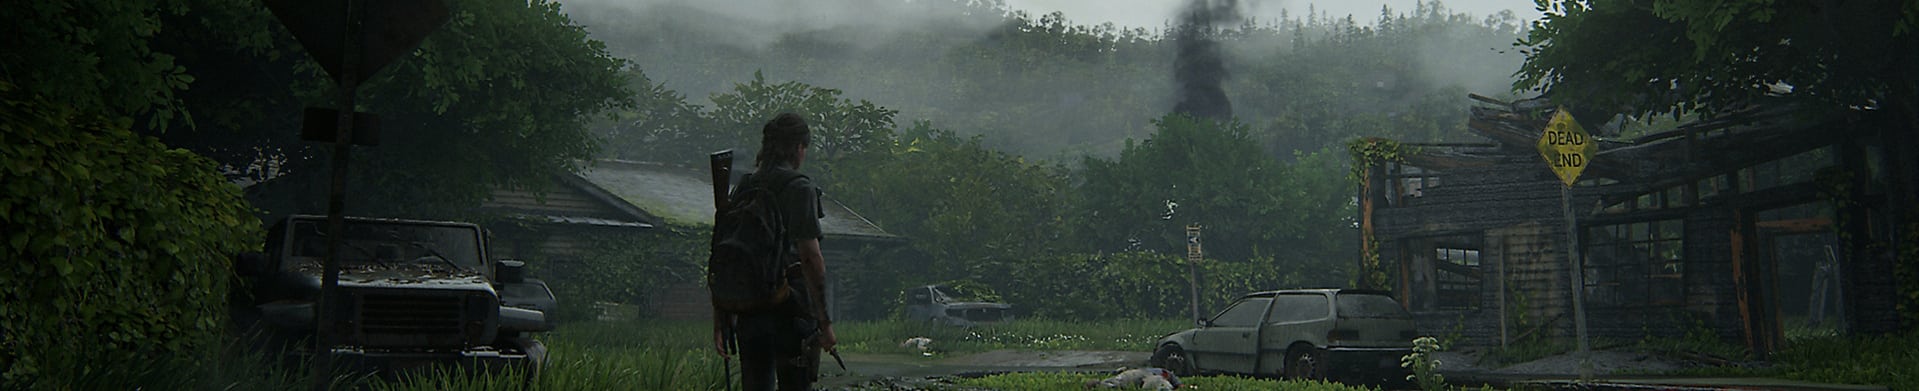 VIRTUOS CONTRIBUTES TO THE LAST OF US: PART II’S IMPRESSIVE IMAGERY